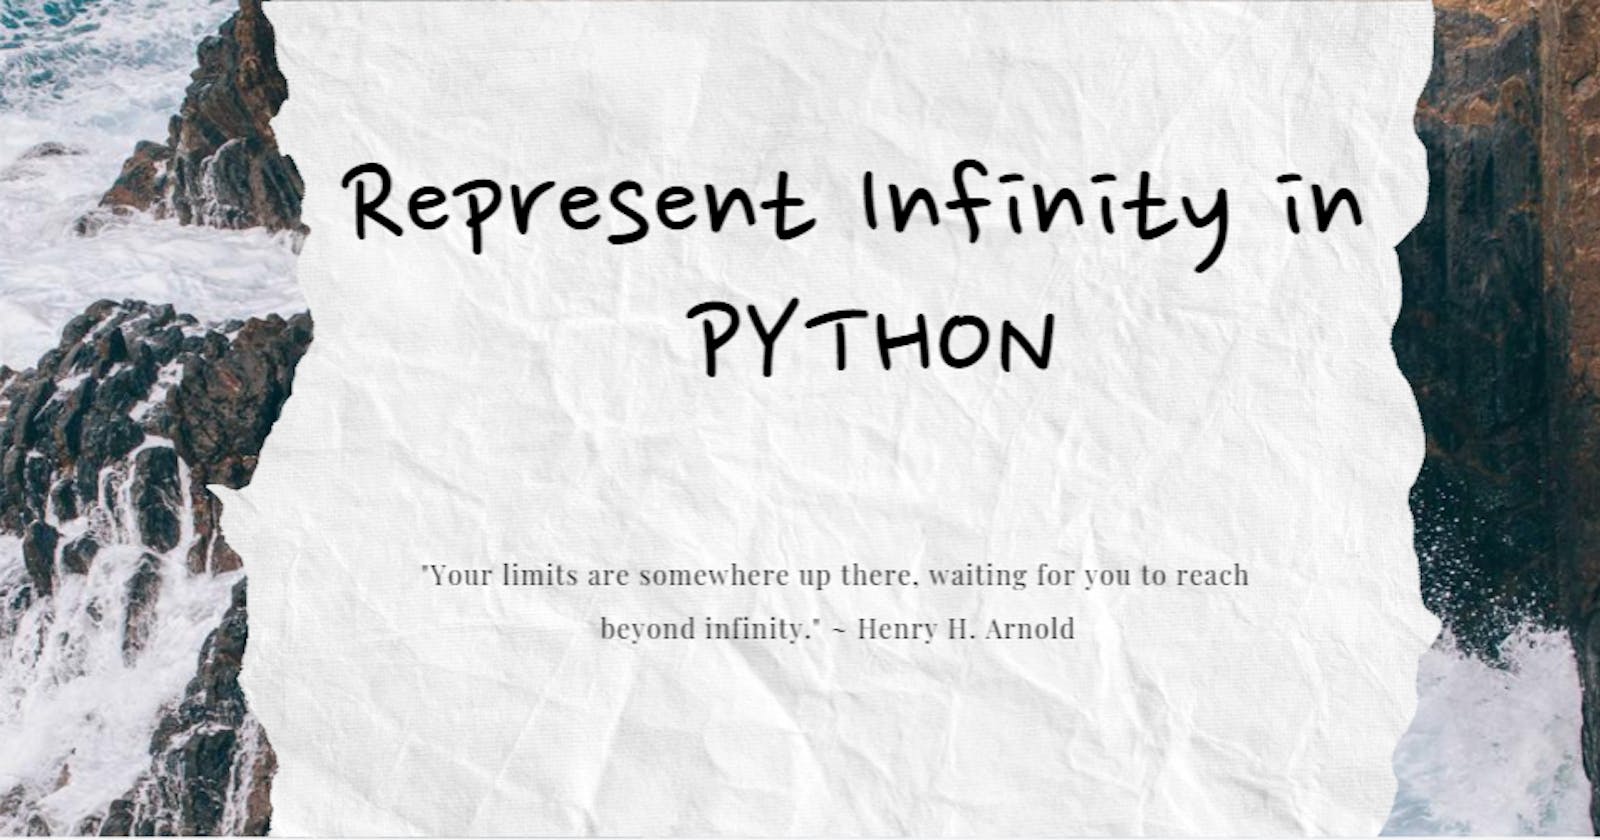 5 ways to represent infinity in Python